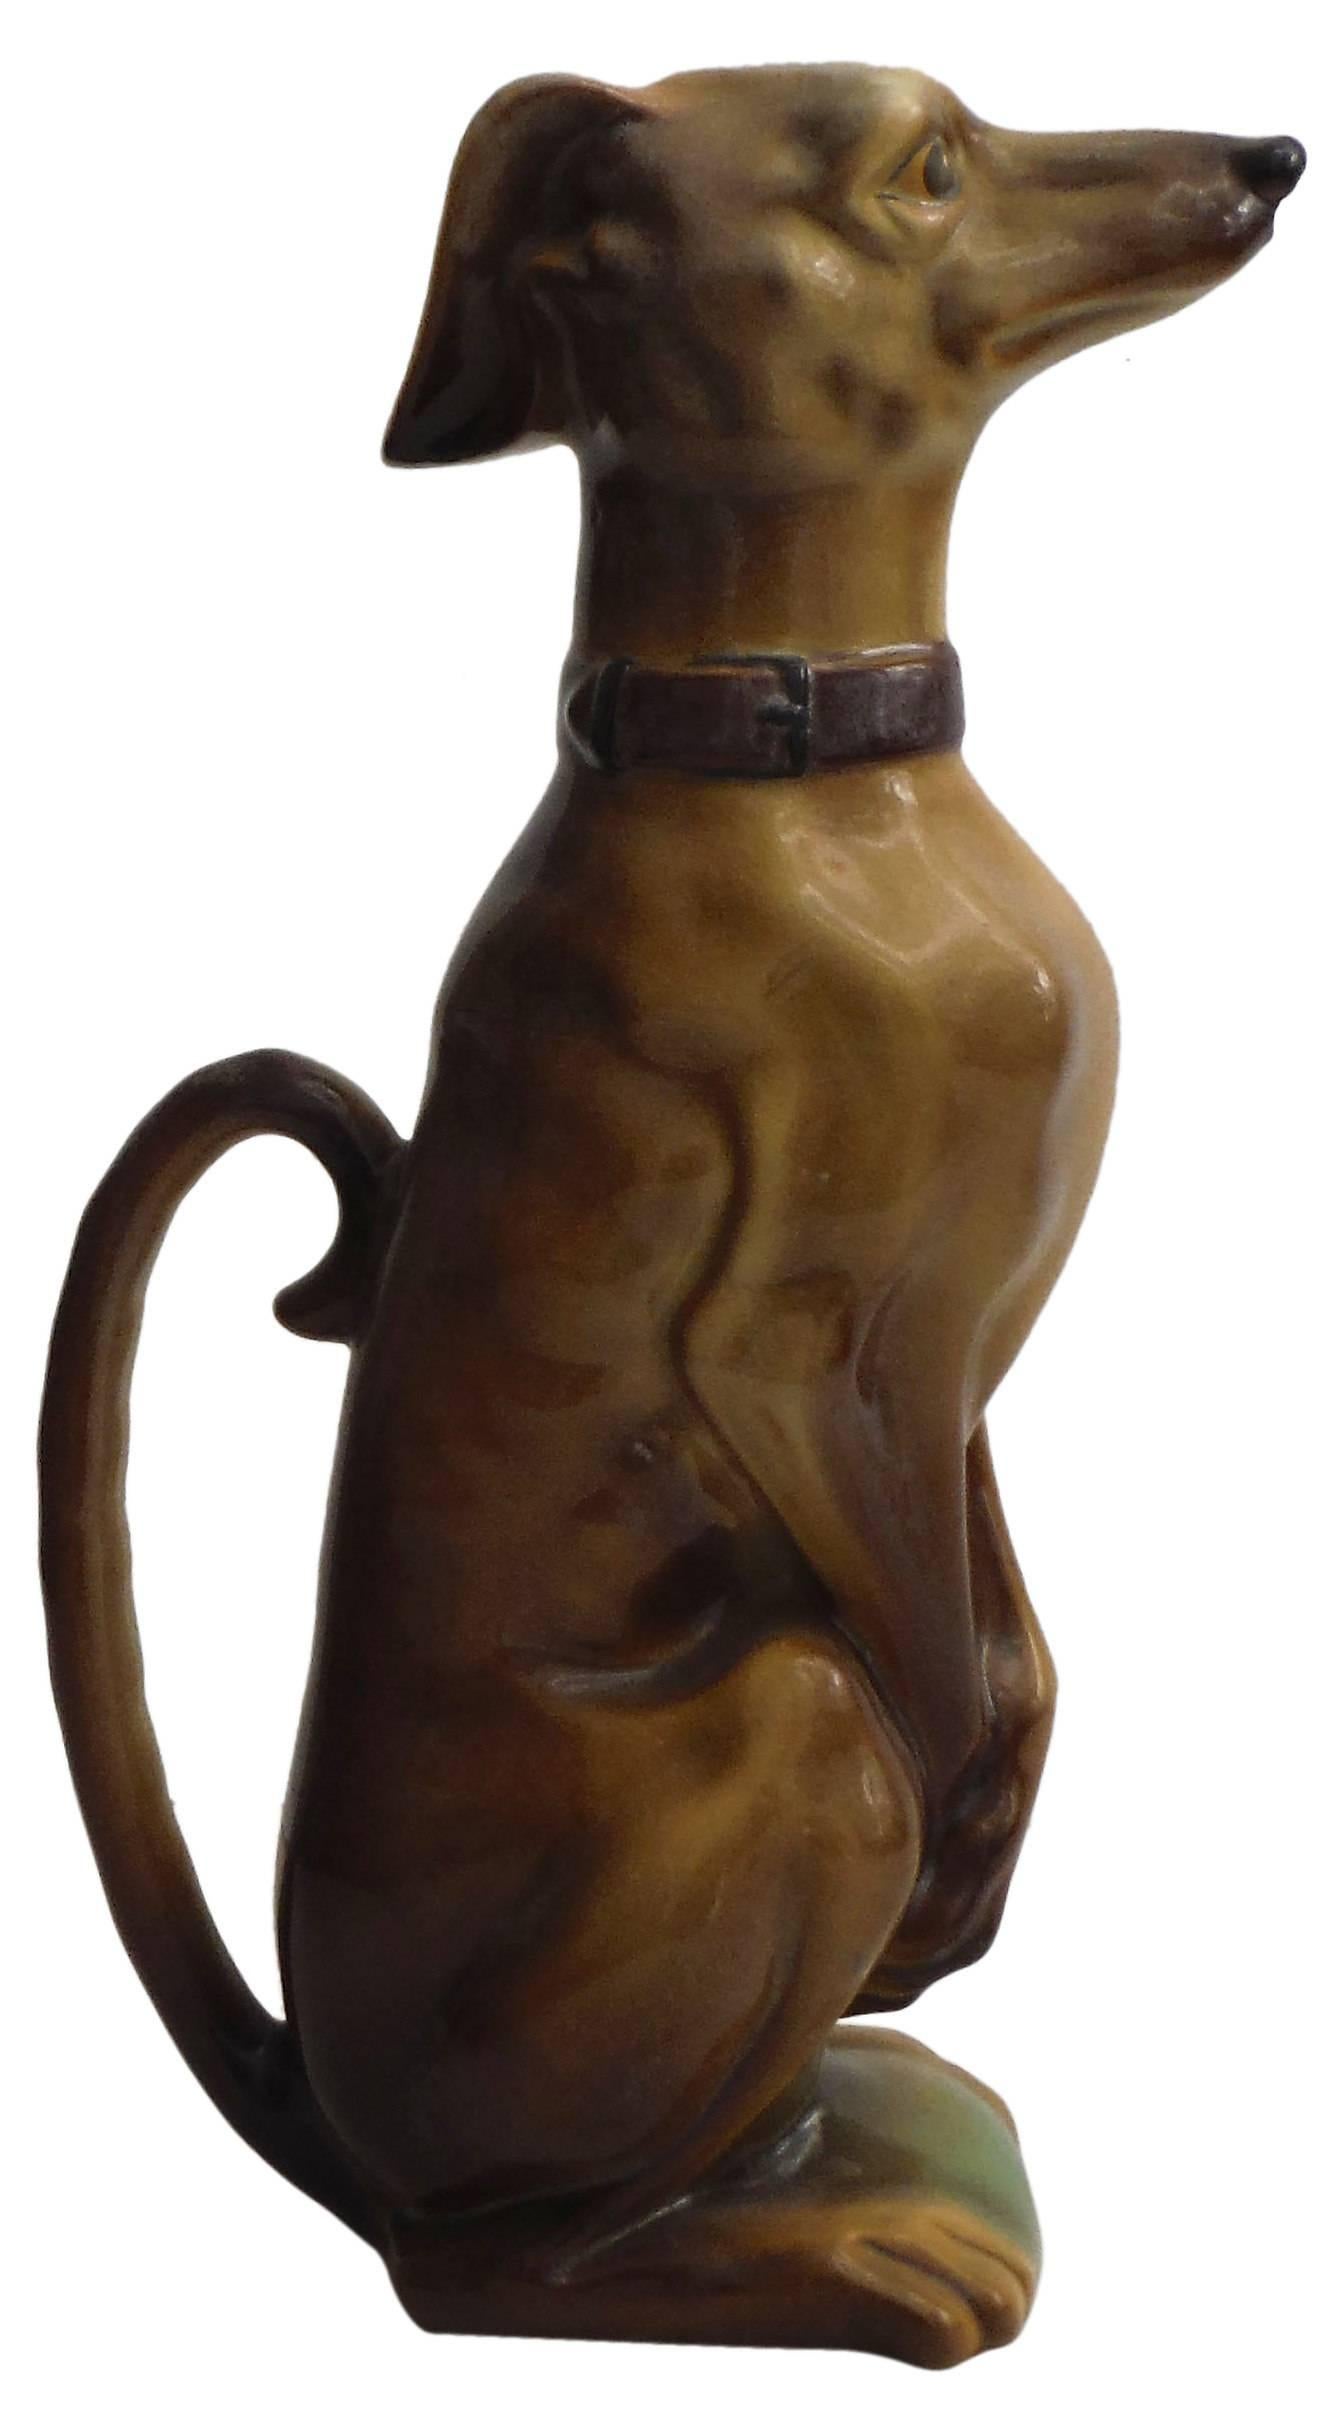 Antique tall Majolica whippet pitcher named Gypp circa 1900 signed Keller and Guerin for the manufacture of Saint Clement.
Reference : Pge 41 